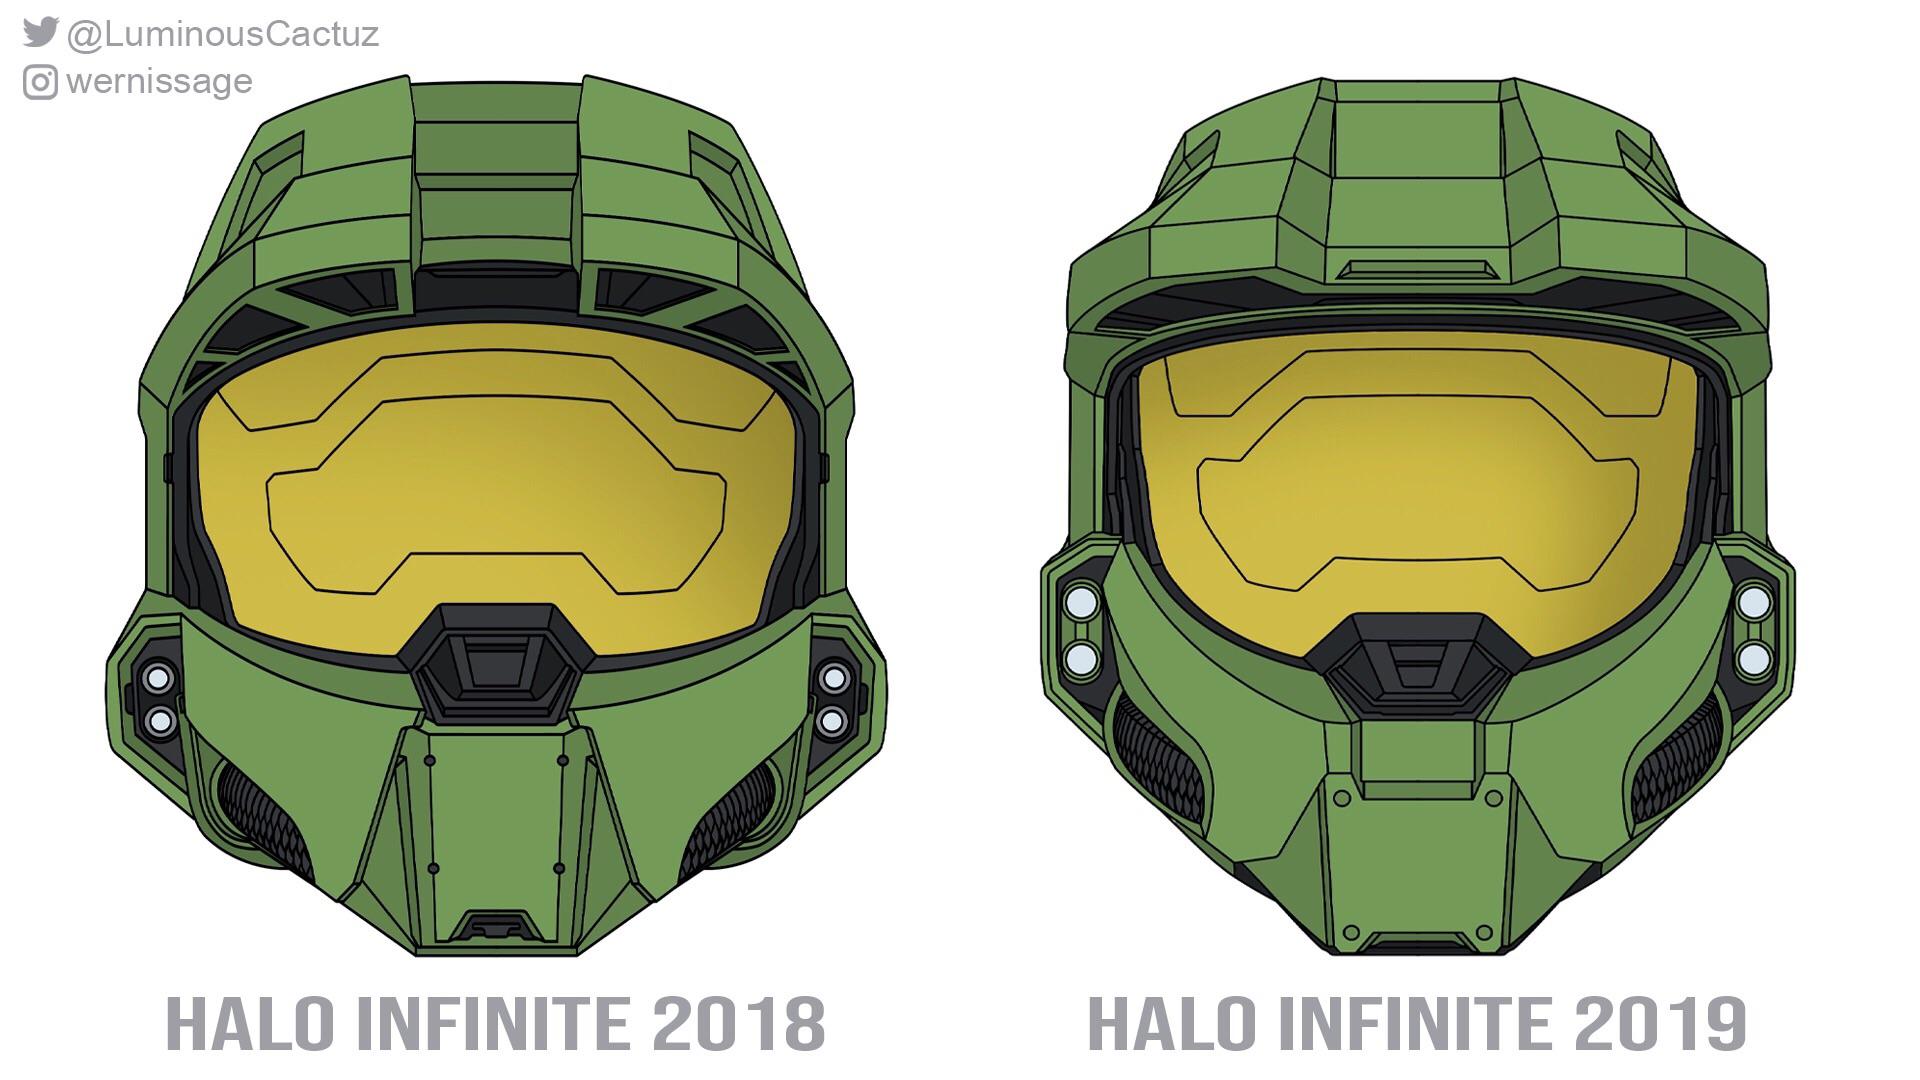 A comparison of Chief's helmet from the 2018 Halo Infinite trailer and his new one. Which one do you guys like better? I'm aware of that the perspective and focal length are